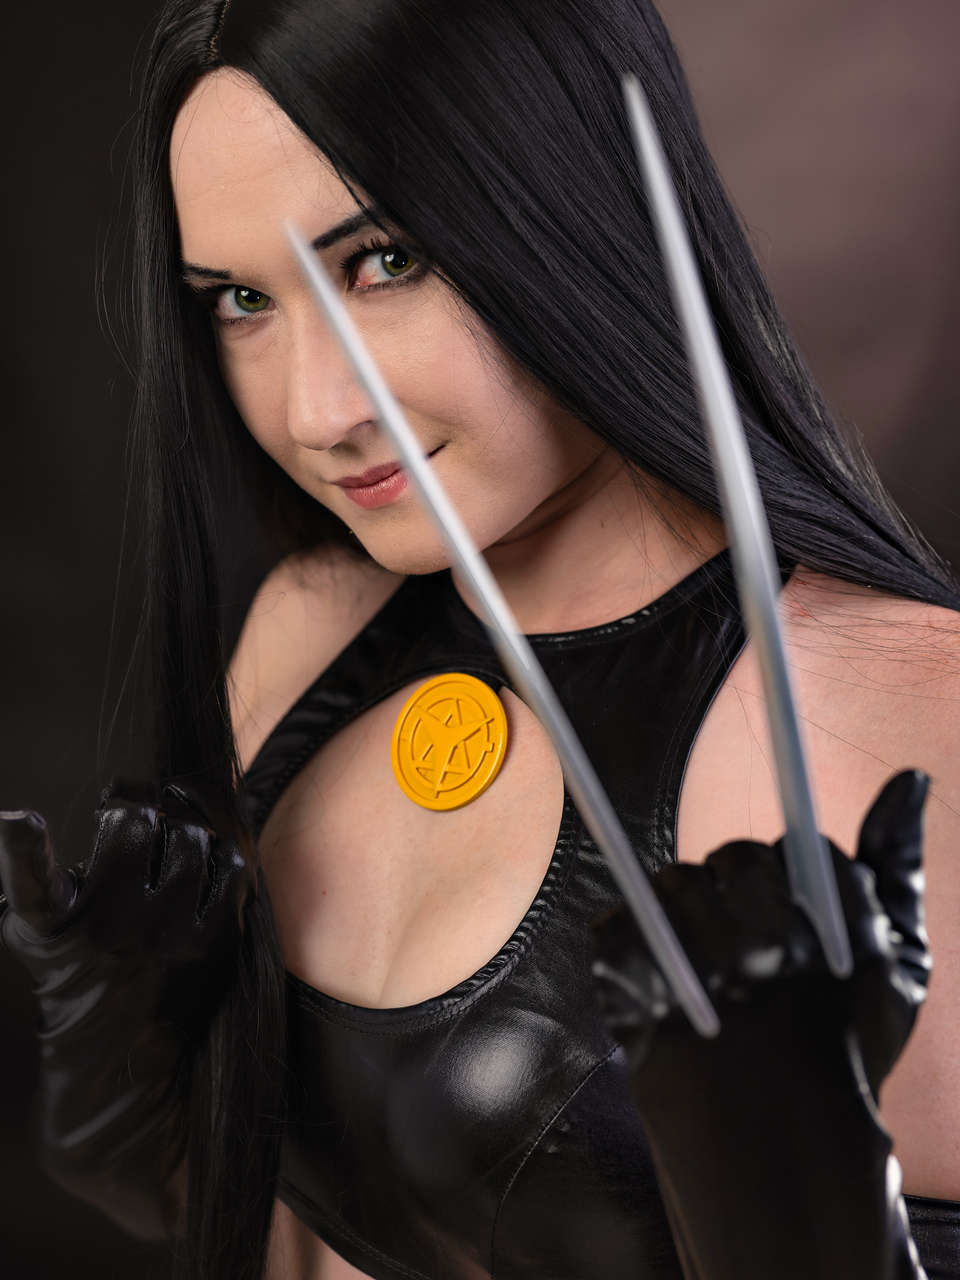 X23 From X Men By Roll4dm